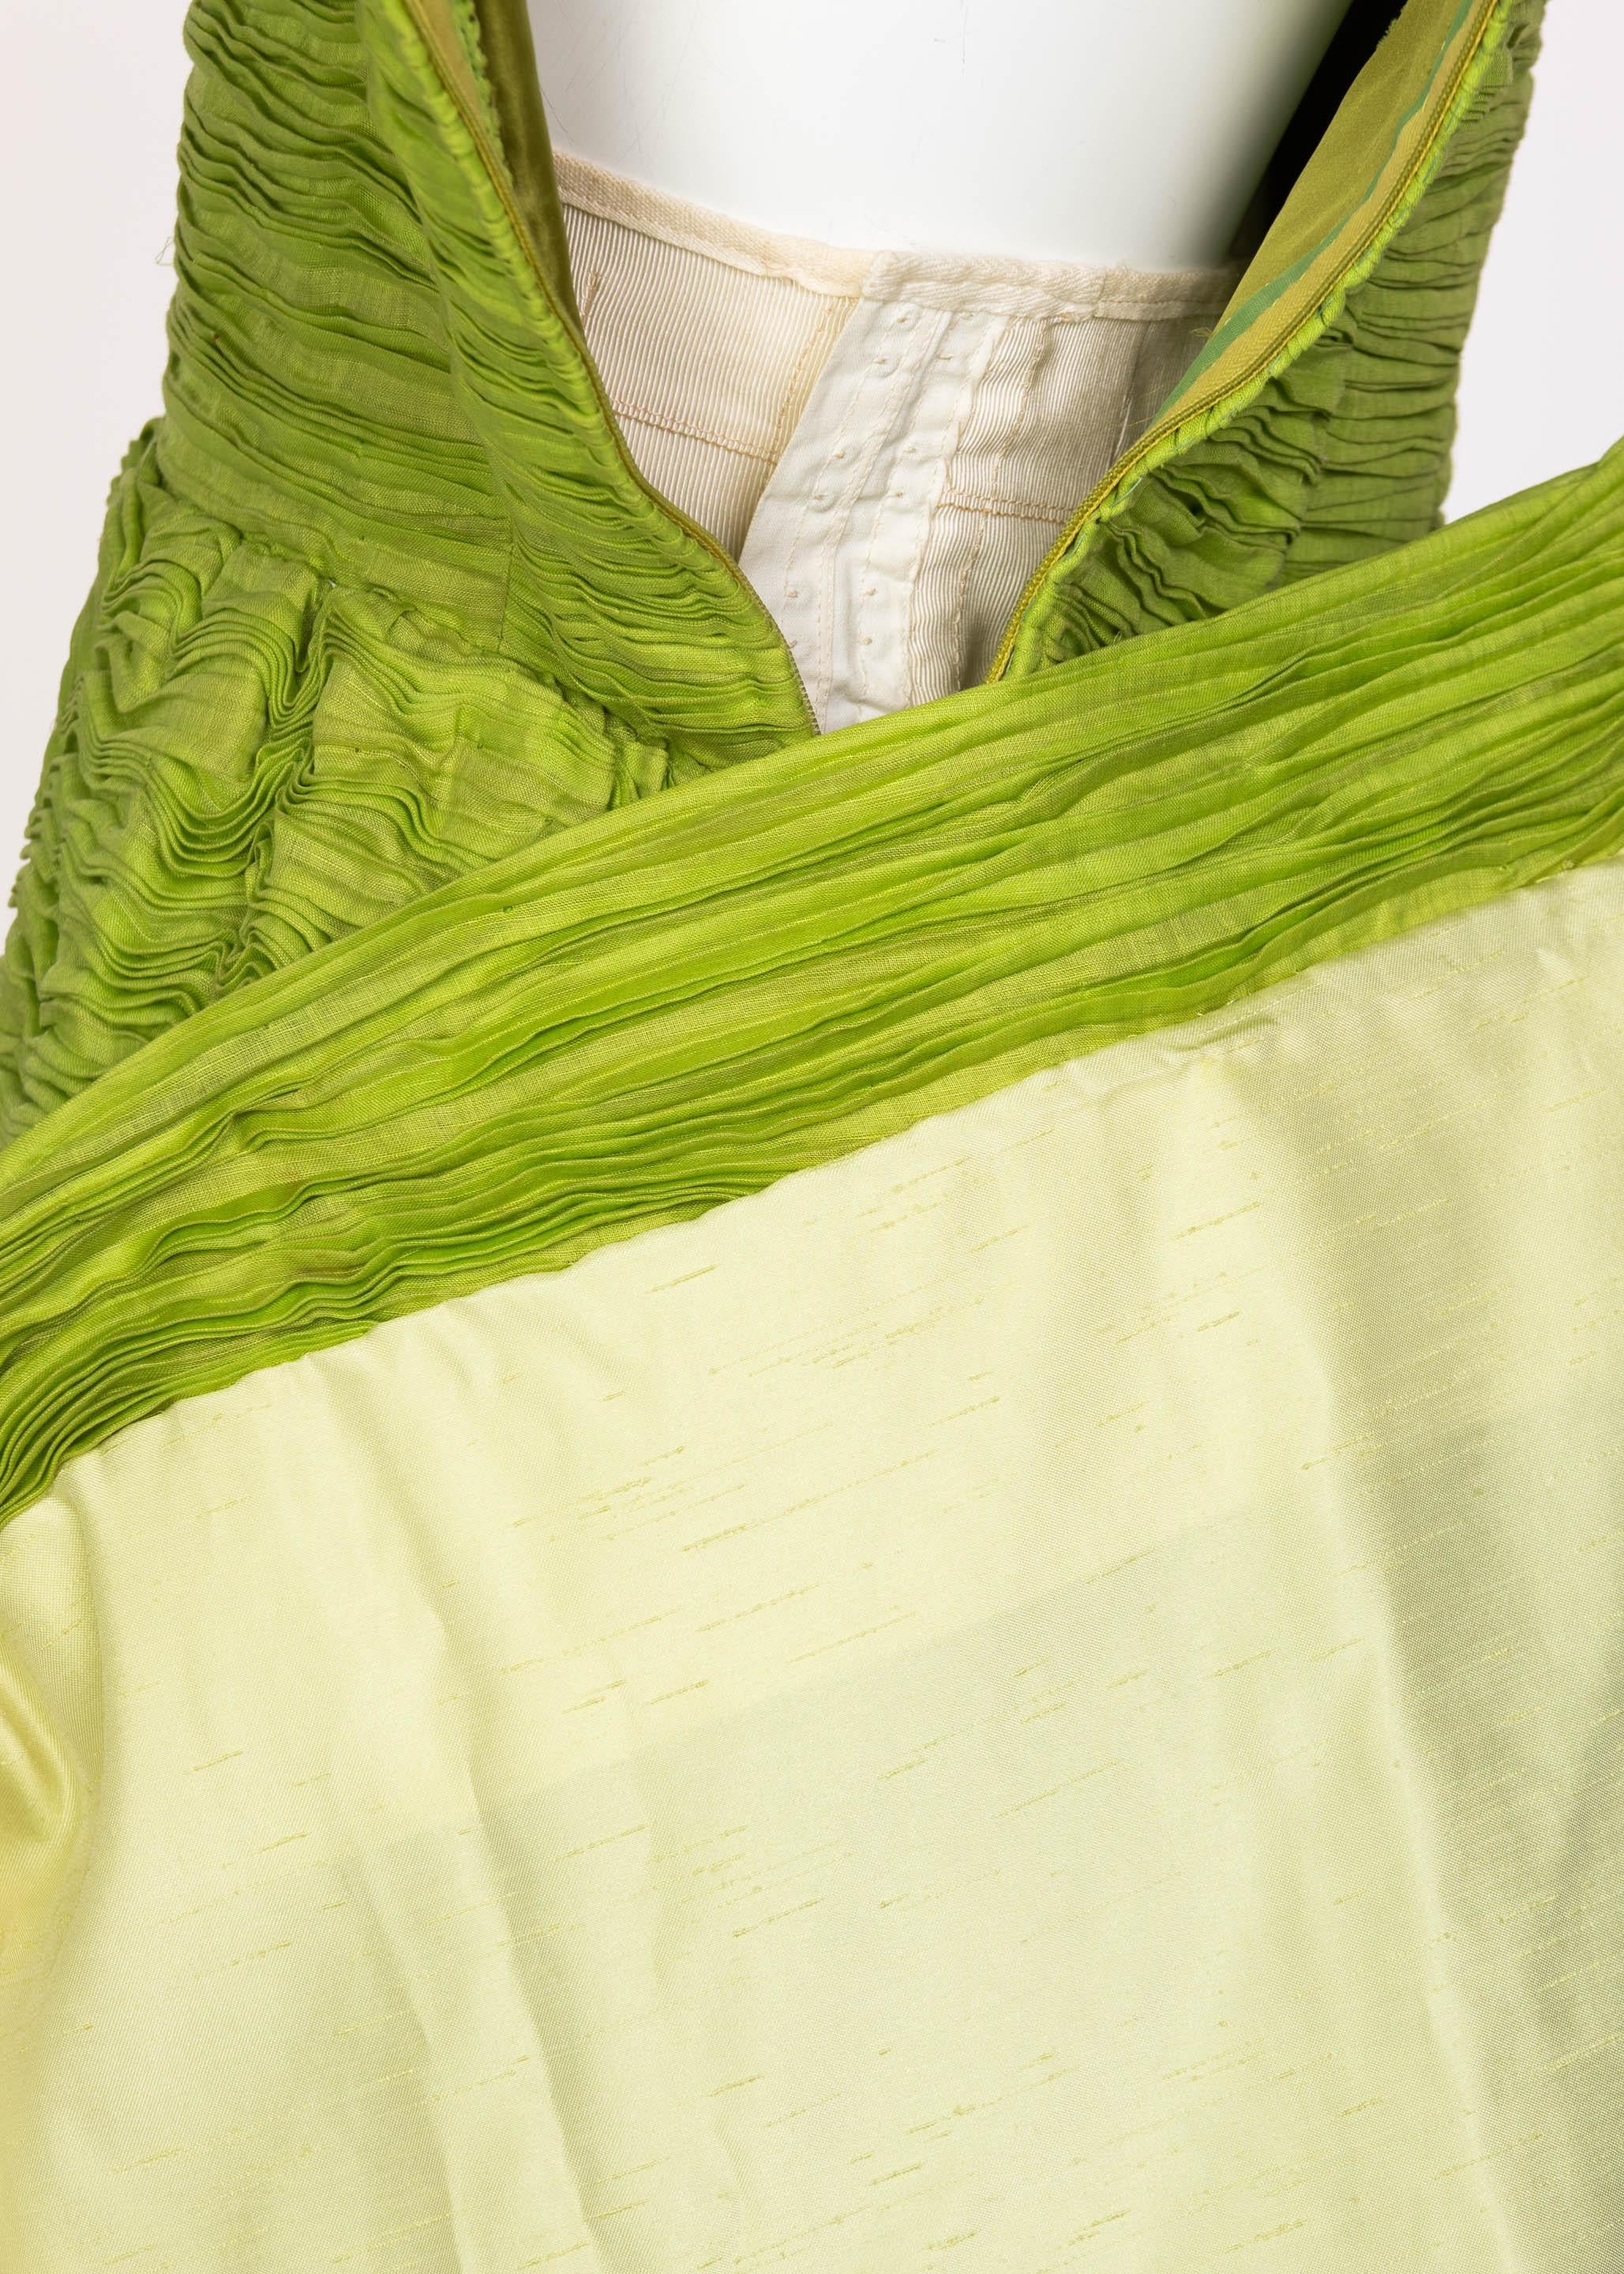 Sybil Connolly Couture Green Pleated Linen Dress, 1960s For Sale 4